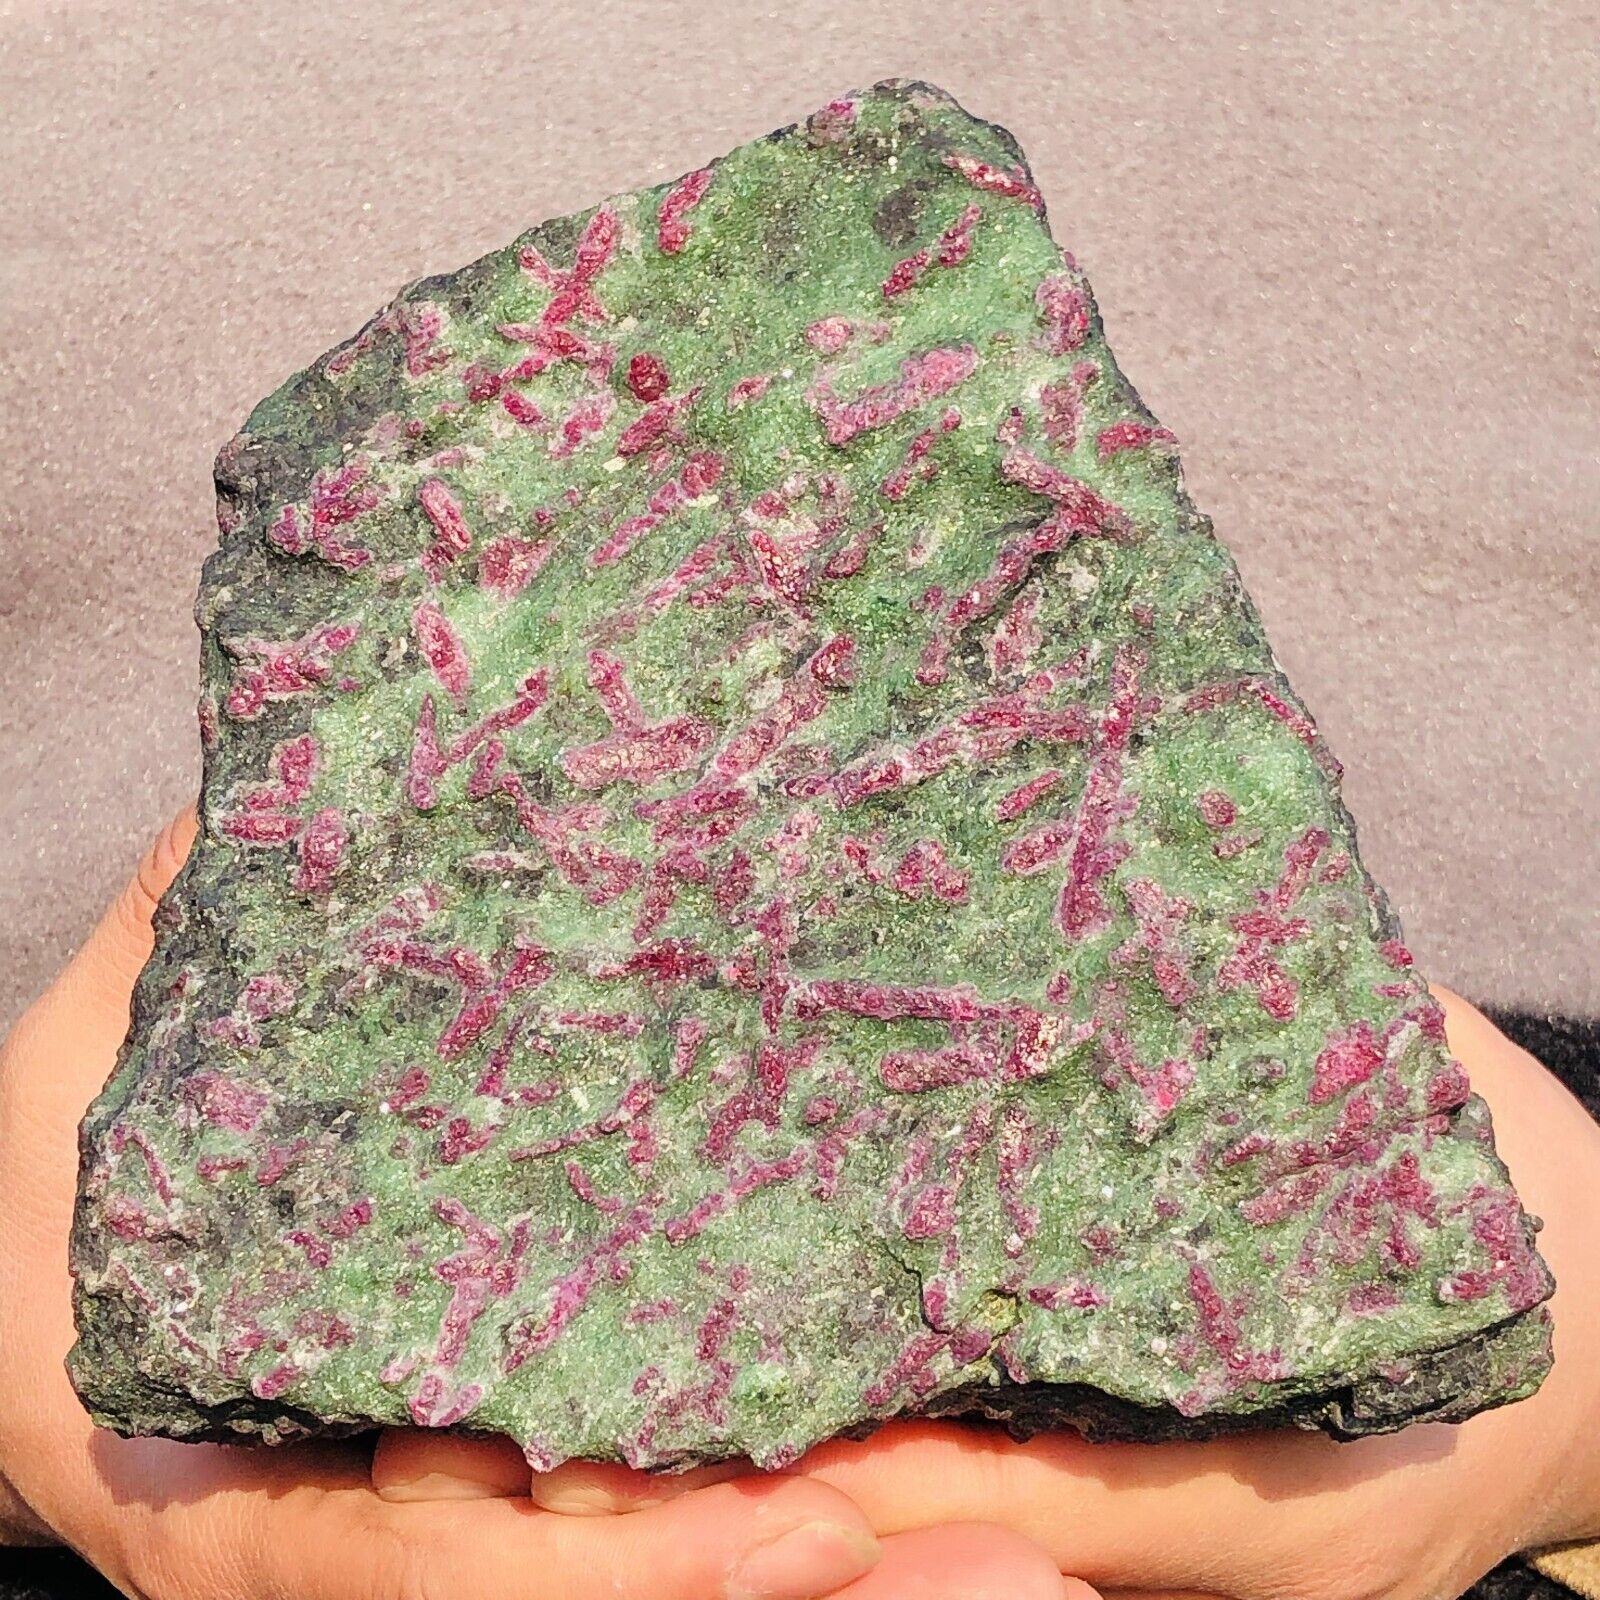 8.02lb Large Rare Natural Red Green Gemstone Ruby Zoisite Crystal Rough Mineral